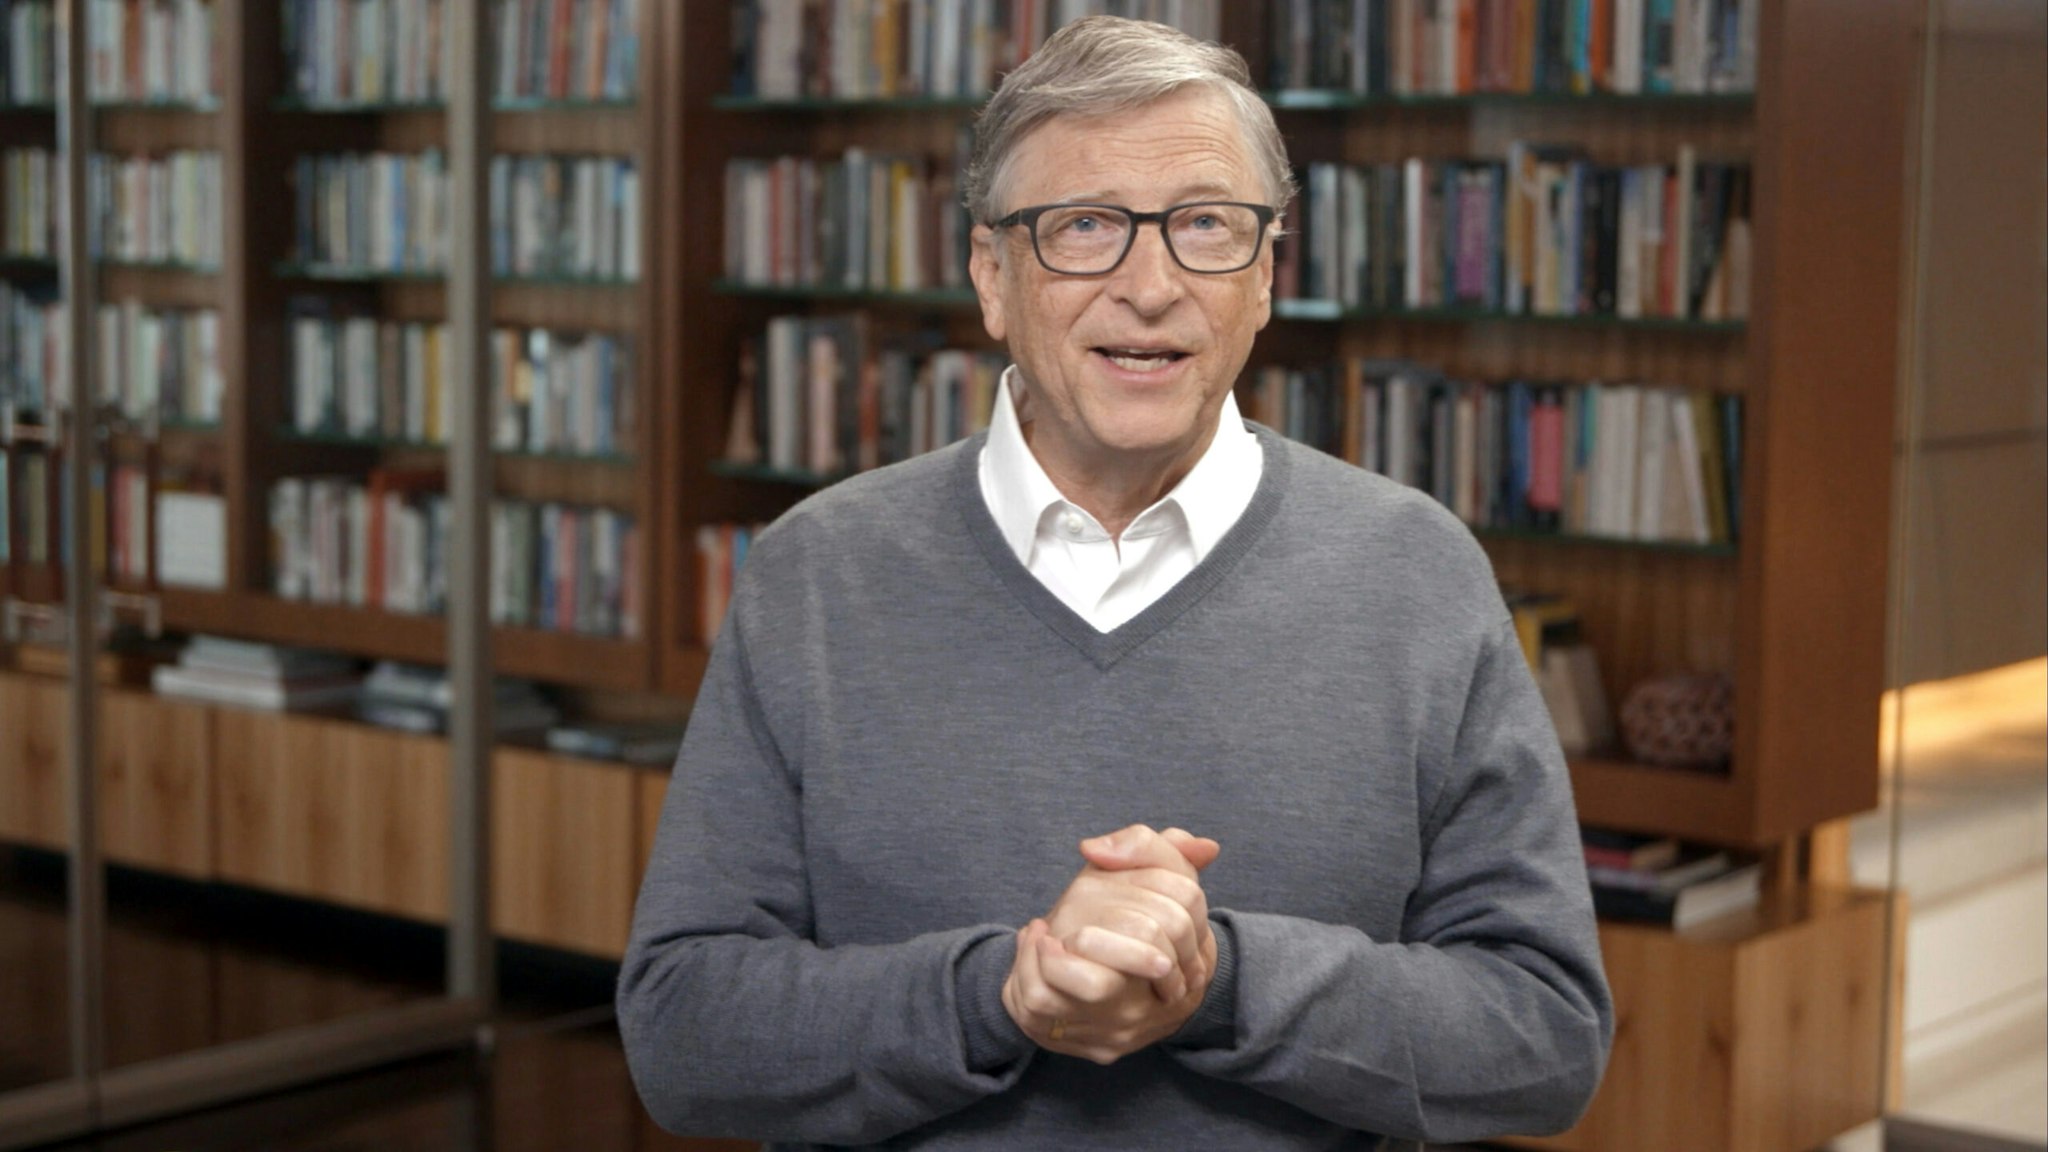 UNSPECIFIED - JUNE 24: In this screengrab, Bill Gates speaks during All In WA: A Concert For COVID-19 Relief on June 24, 2020 in Washington.